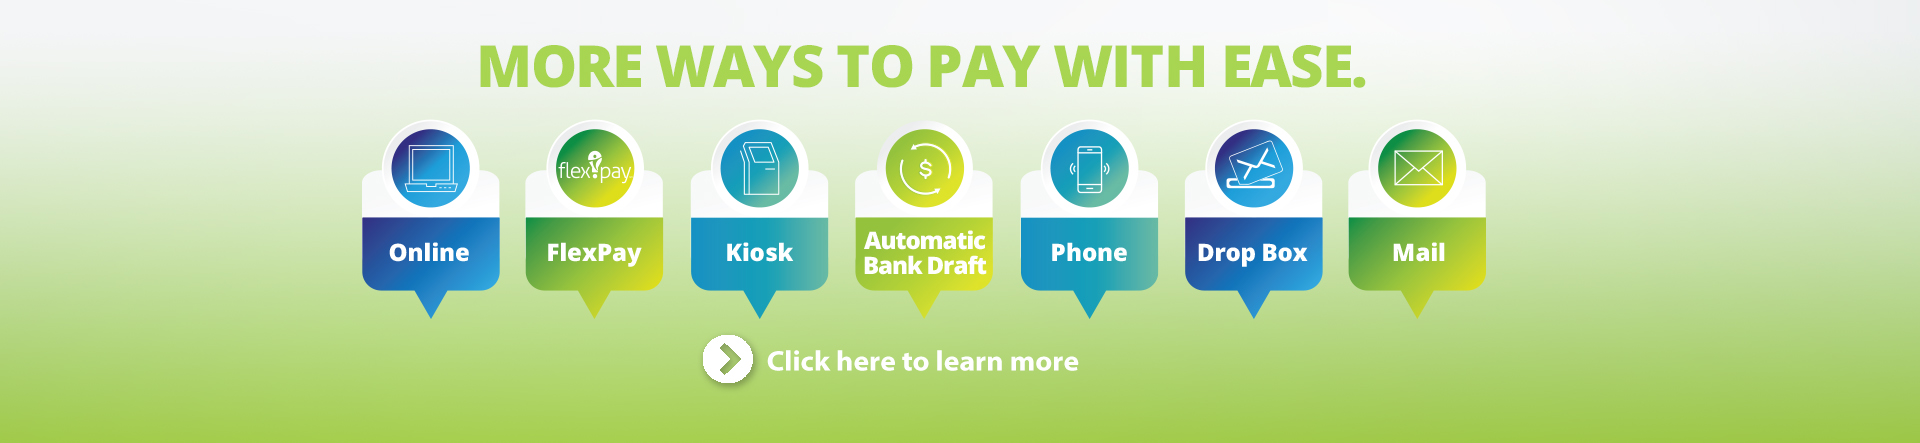 Mutiple Ways to Pay Your Bill